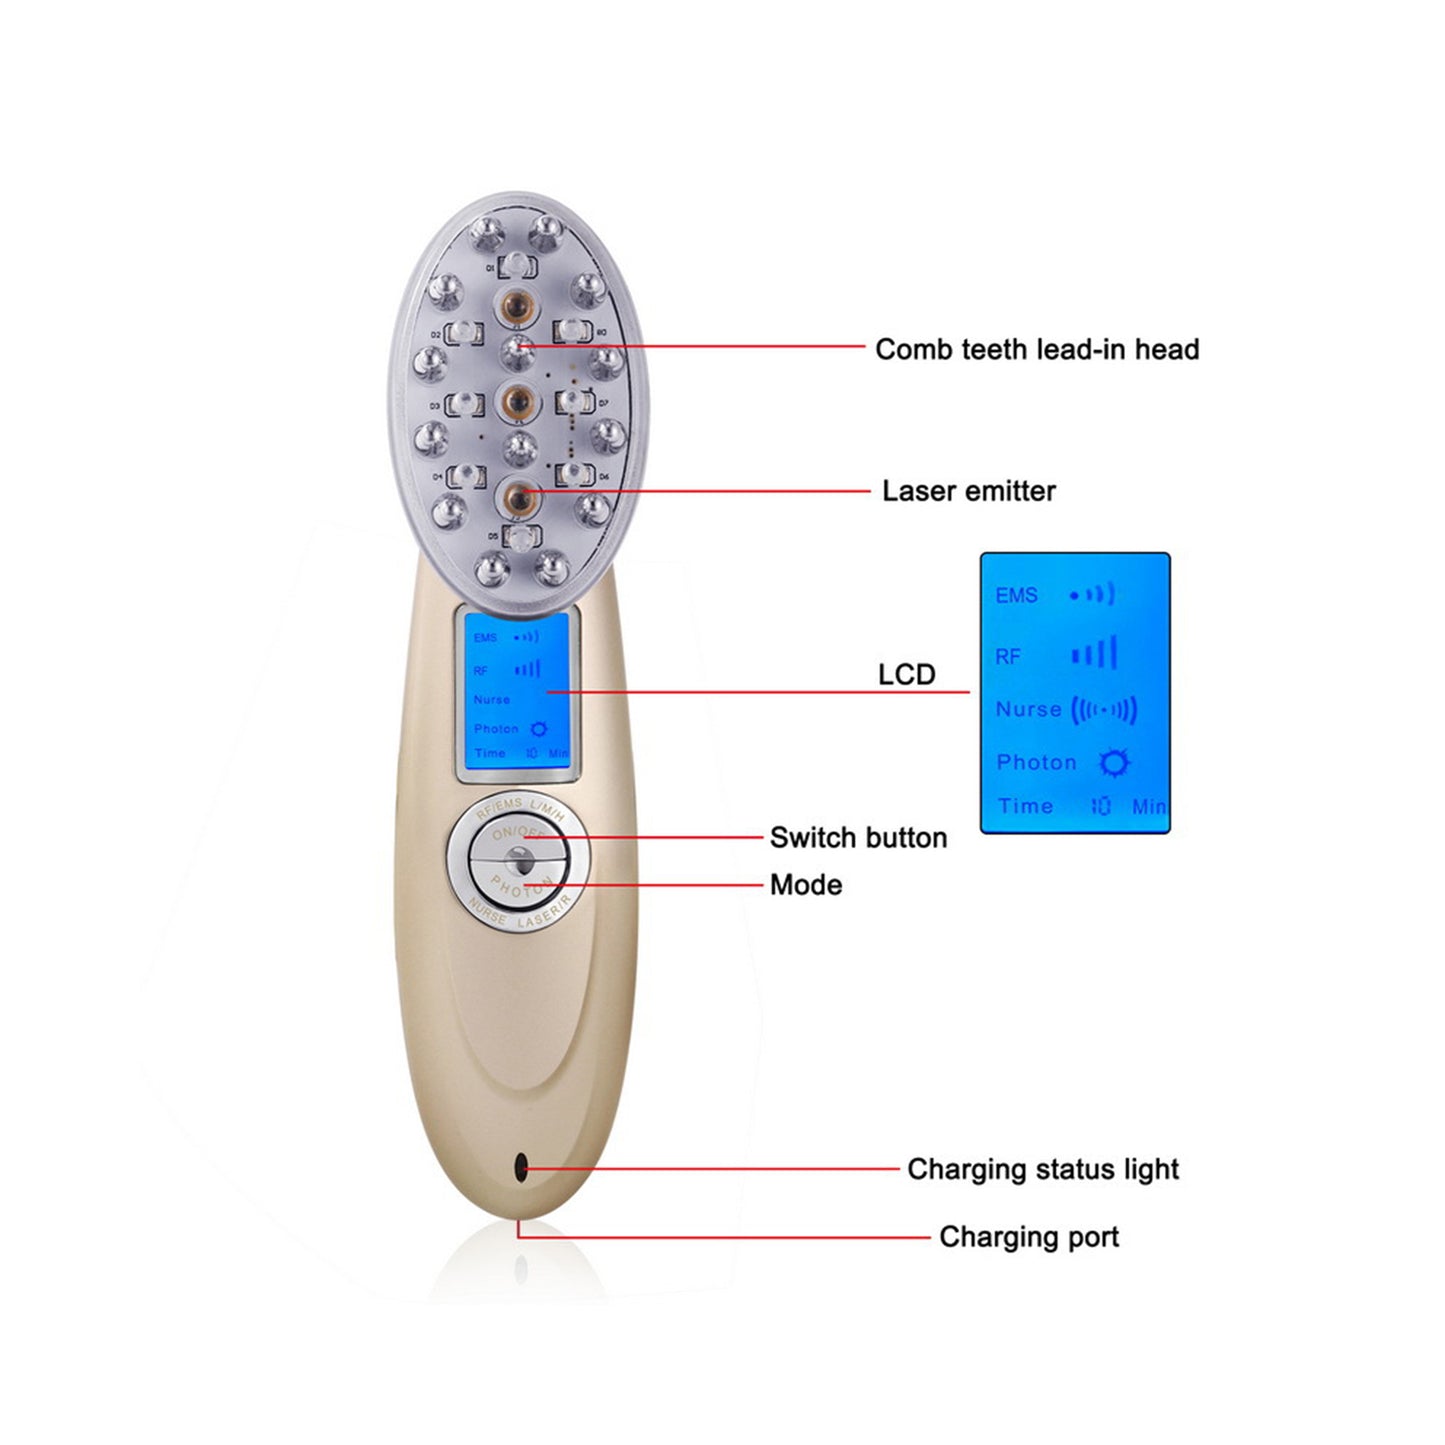 Scalp Massage Laser Comb Anti Hair Loss Therapy Infrared RF Red Light EMS Vibration